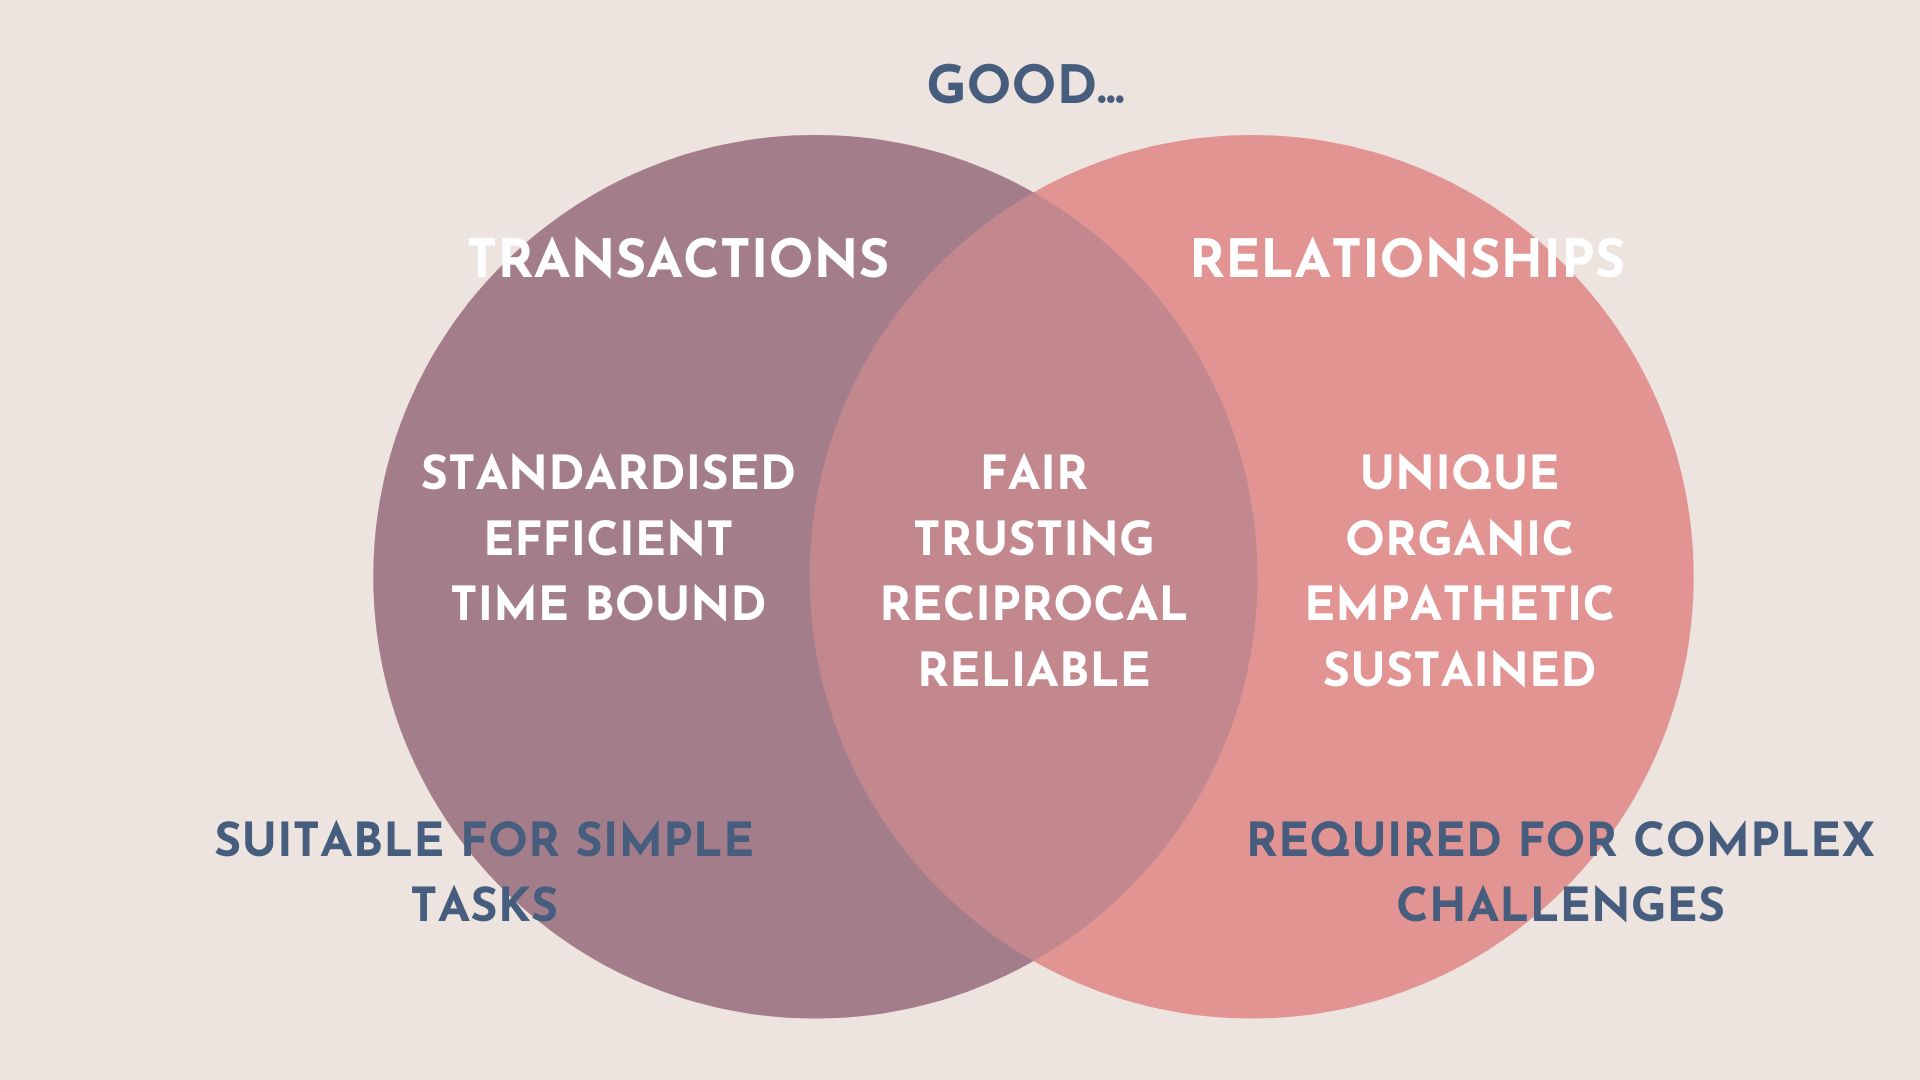 Venn diagram showing the characteristics of a good relationship and the characteristics of a good transaction. A good relationship is: unique, organic, empathetic, sustained, and suitable for complex challenges. A good transaction is standardised, efficient, time-bound and good for simple tasks. Good relationships and good transactions are both fair, trusting, reciprocal and reliable